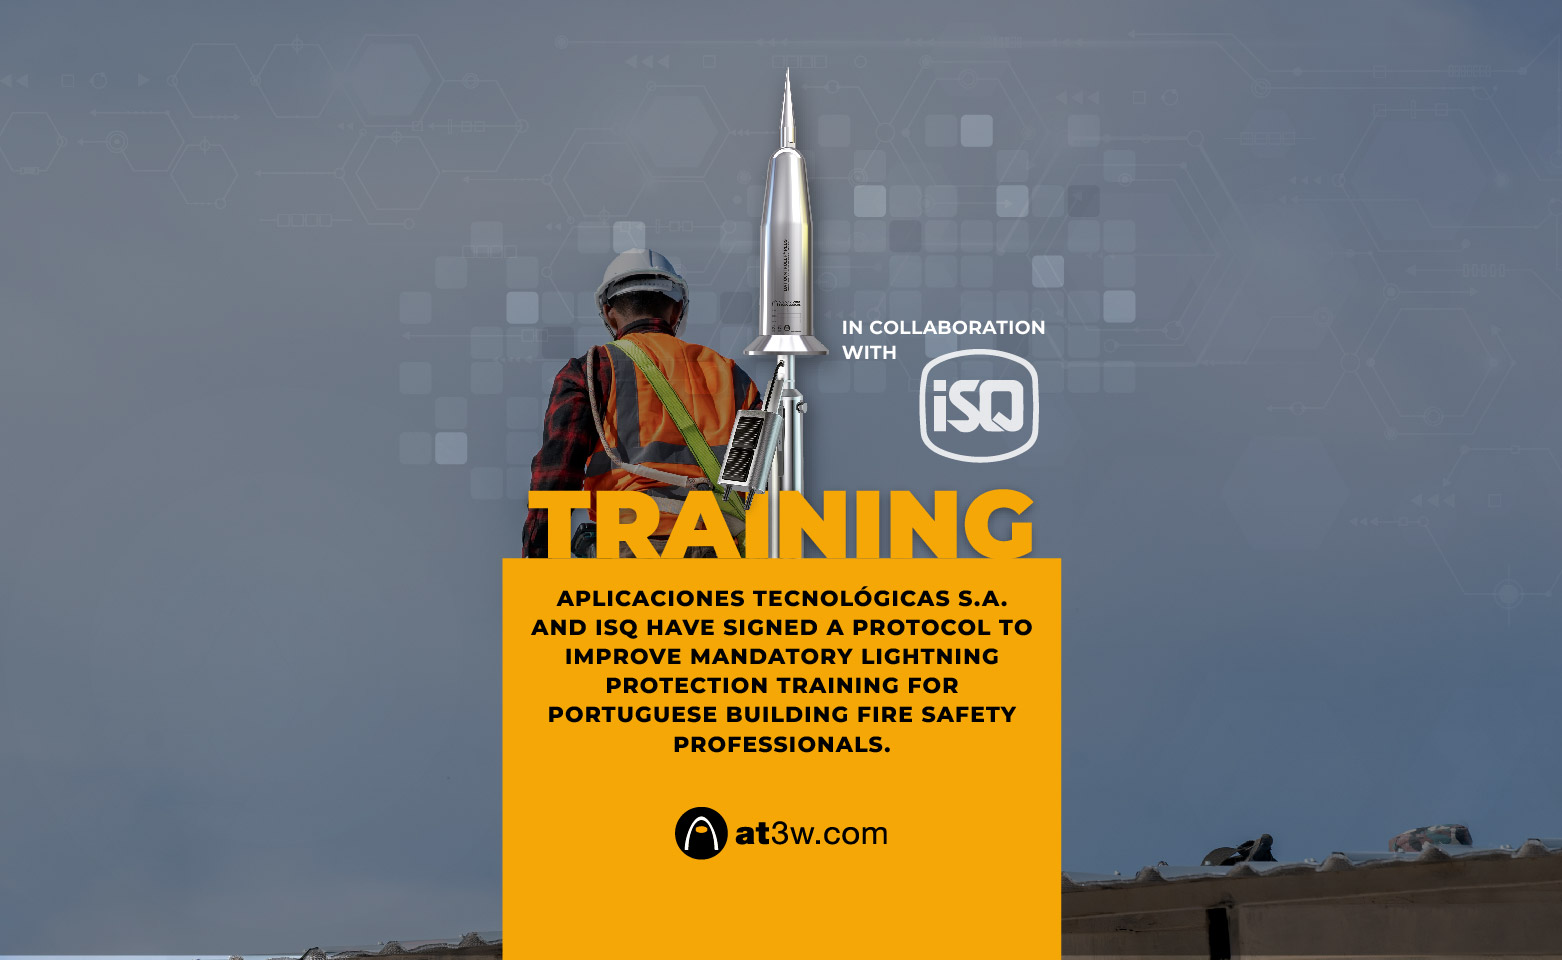 aplicaciones-tecnologicas-isq-protocol-to-improve-mandatory-lightning-protection-training-for-portuguese-building-fire-safety-professionals-lightning-rod